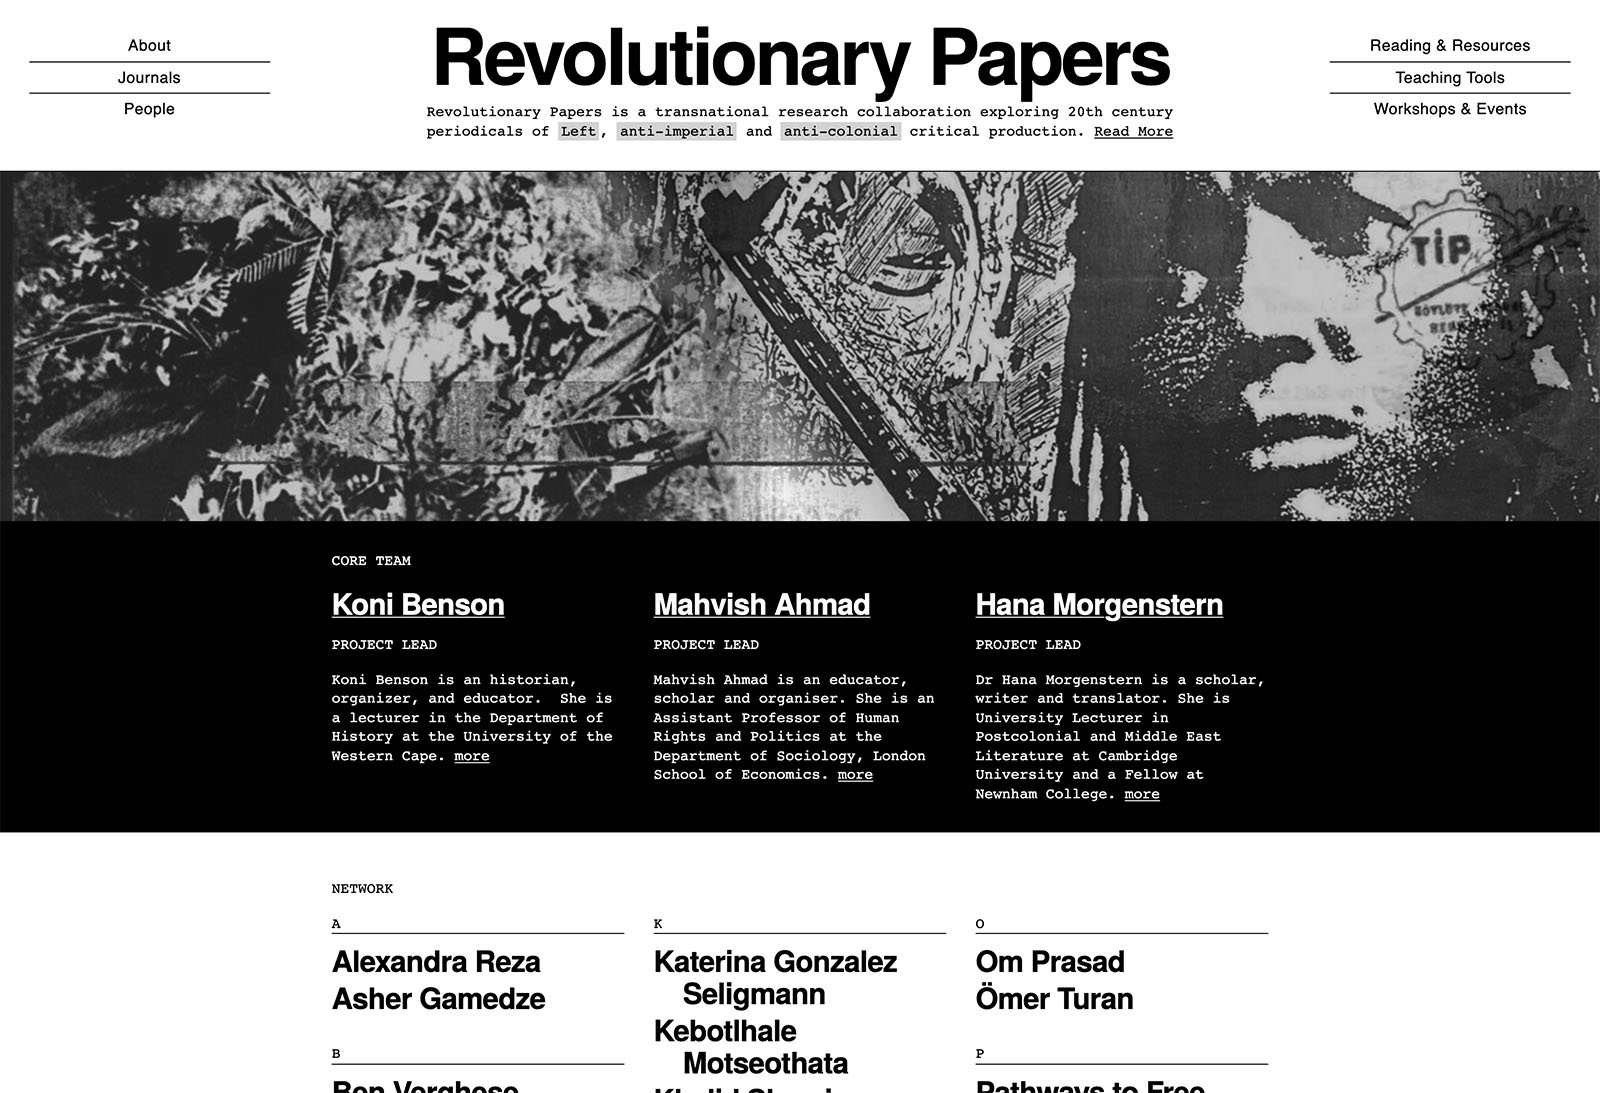 Revolutionary Papers people page showing bios of the core team and listing other contributors